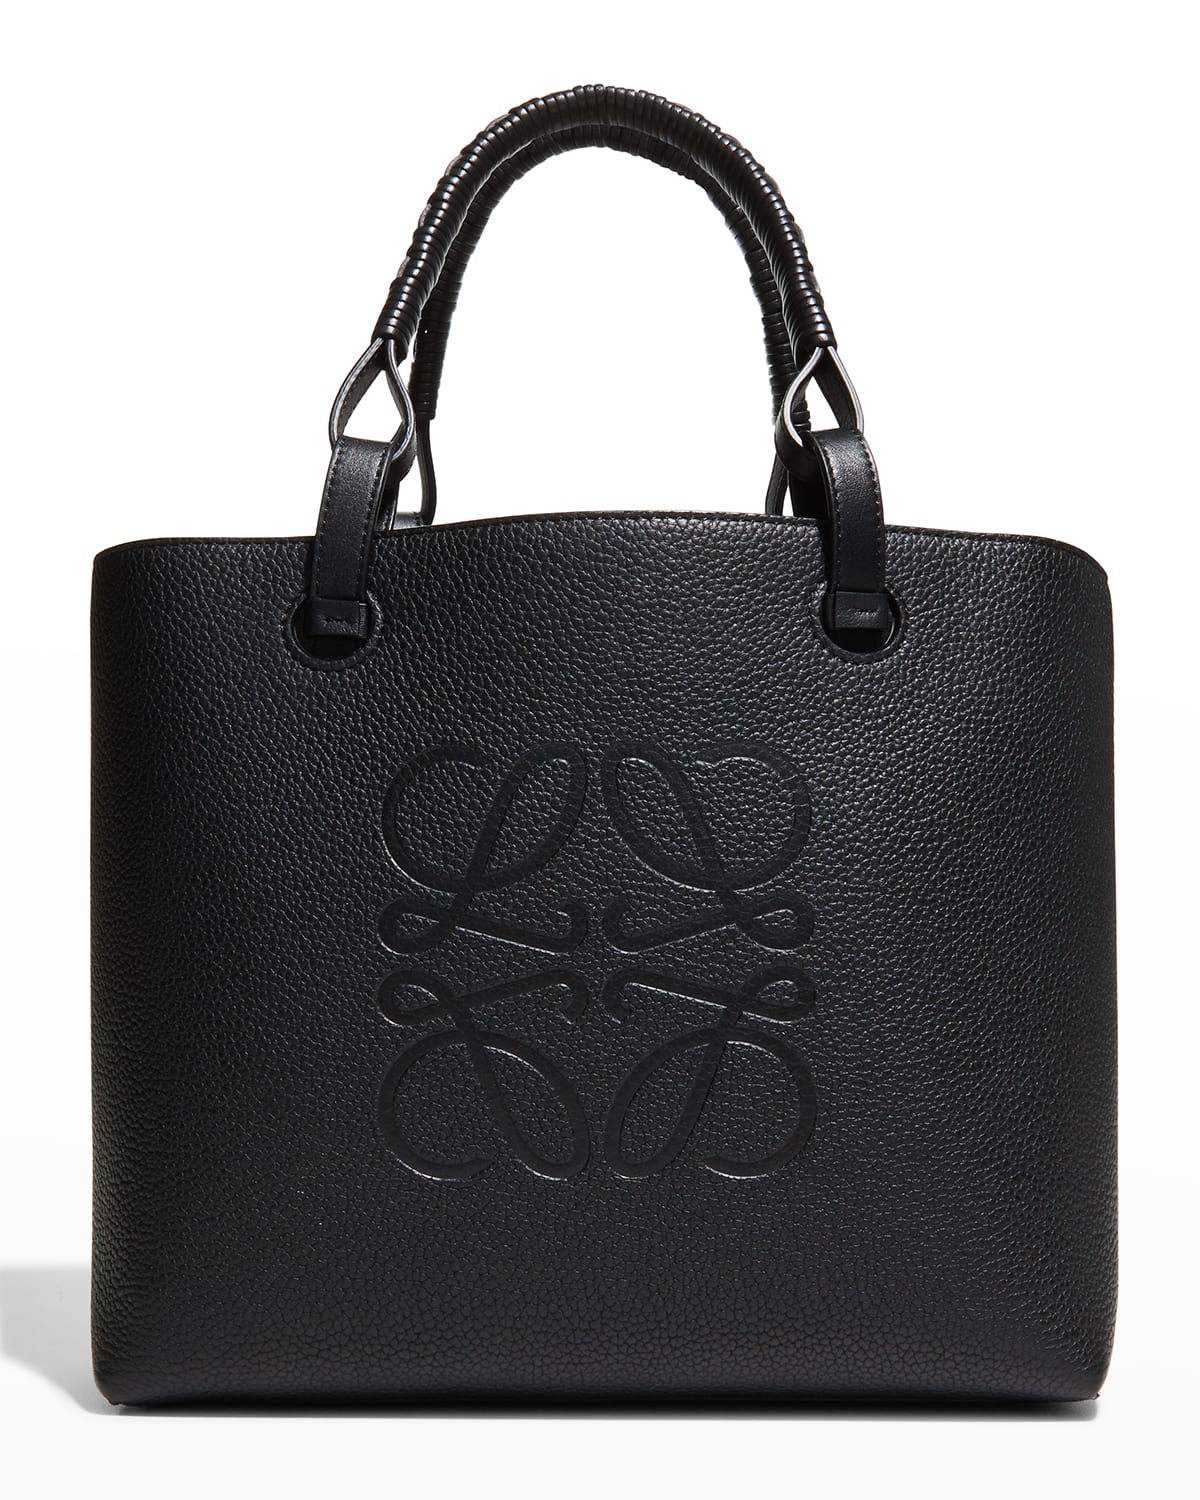 LOEWE ANAGRAM SMALL CLASSIC LEATHER TOTE BAG,PROD237330230